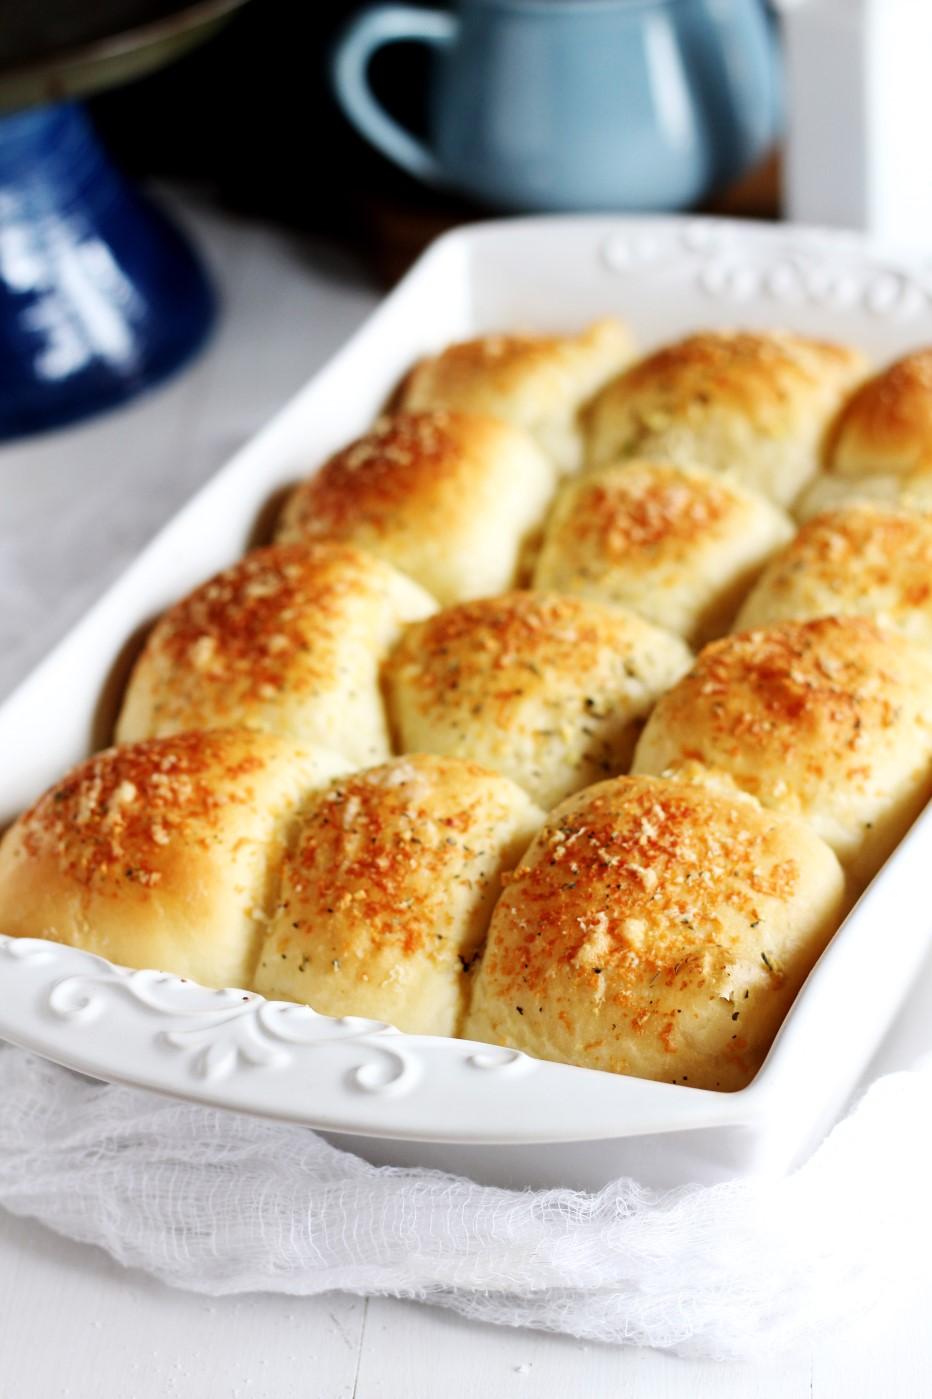 Buttery Garlic Parmesan Rolls ¼ cup warm water, about 110 degrees 2¼ teaspoons (1 pkg) active dry yeast ¾ cup warm milk (I recommend 2%), about 110 degrees 2 tablespoons unsalted butter 1 egg,